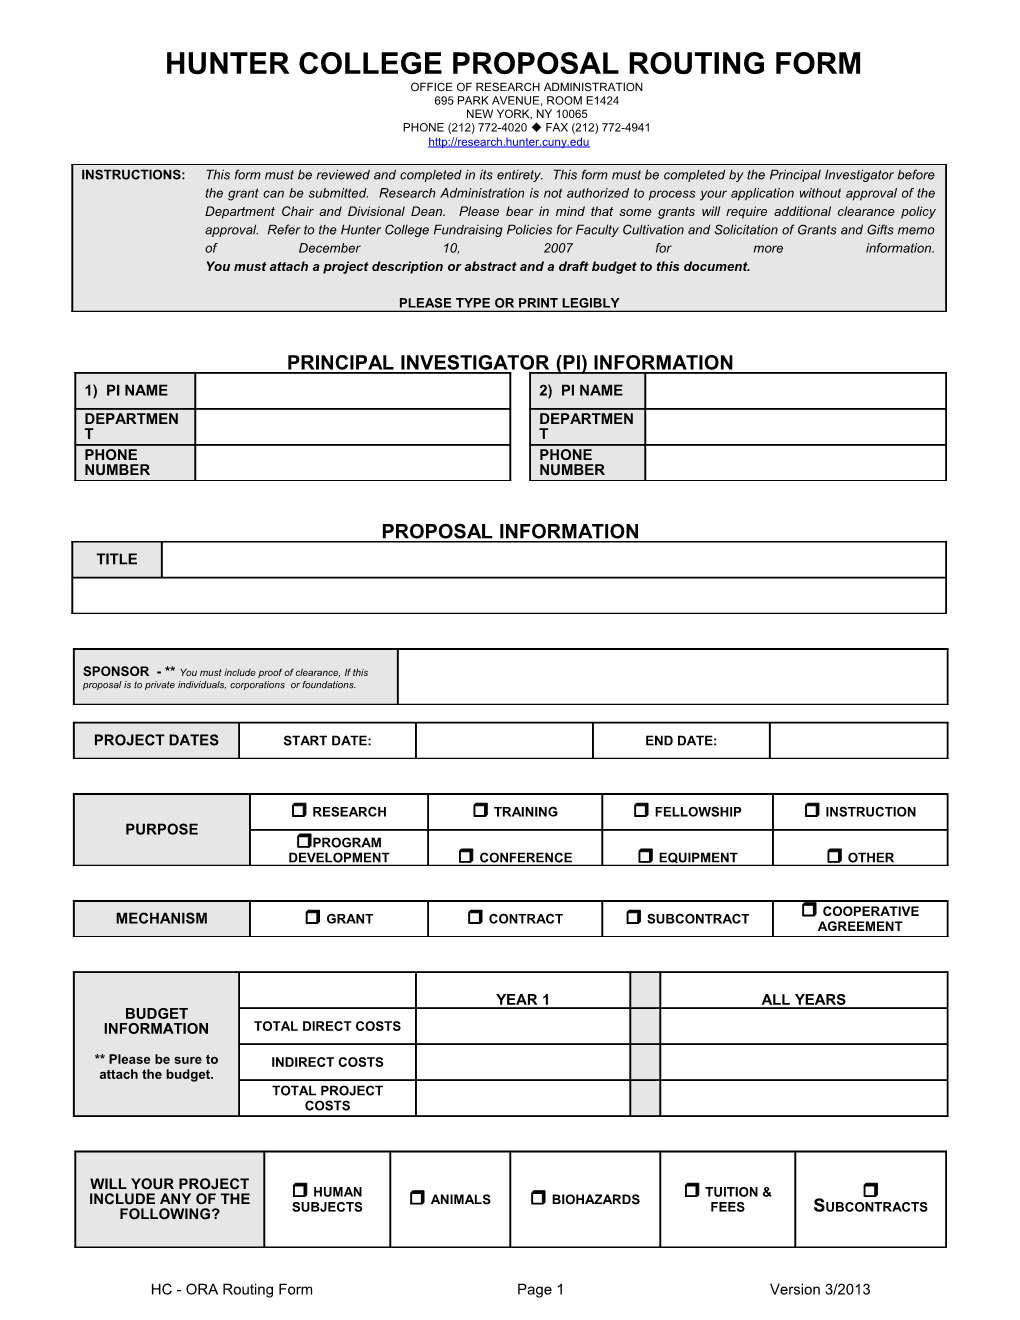 Hunter College Proposal Routing Form